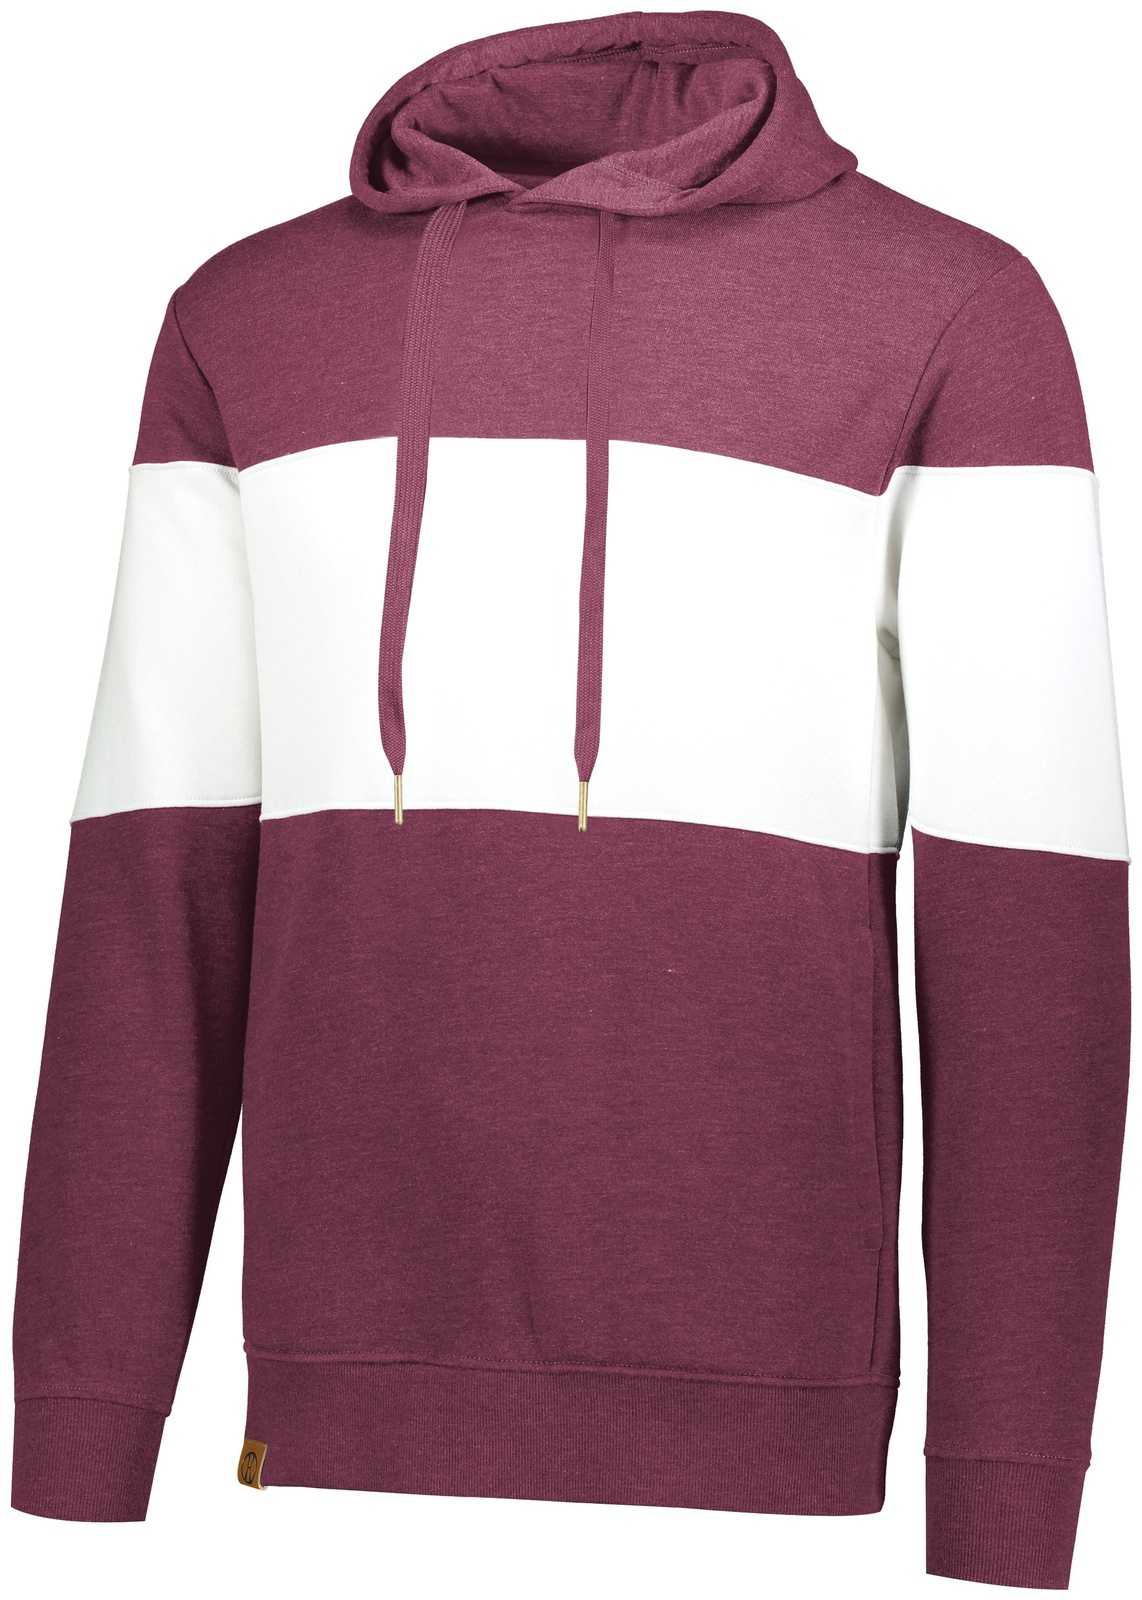 Holloway 229563 Ivy League Hoodie - Maroon Heather White - HIT a Double